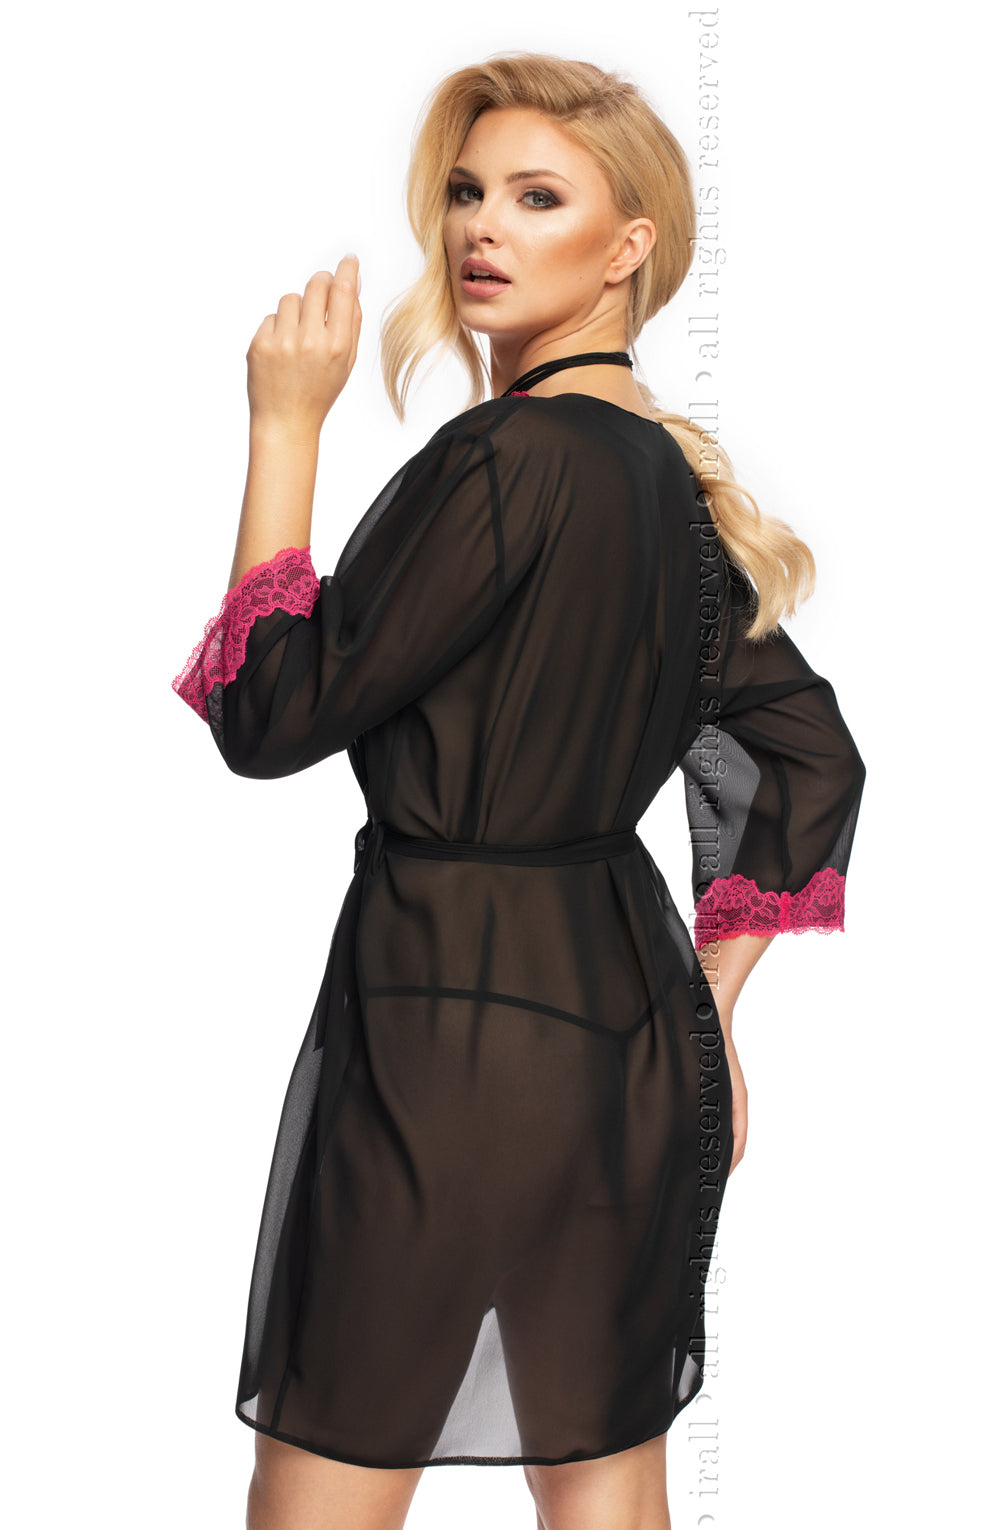 Irall Erotic Flavia Dressing Gown